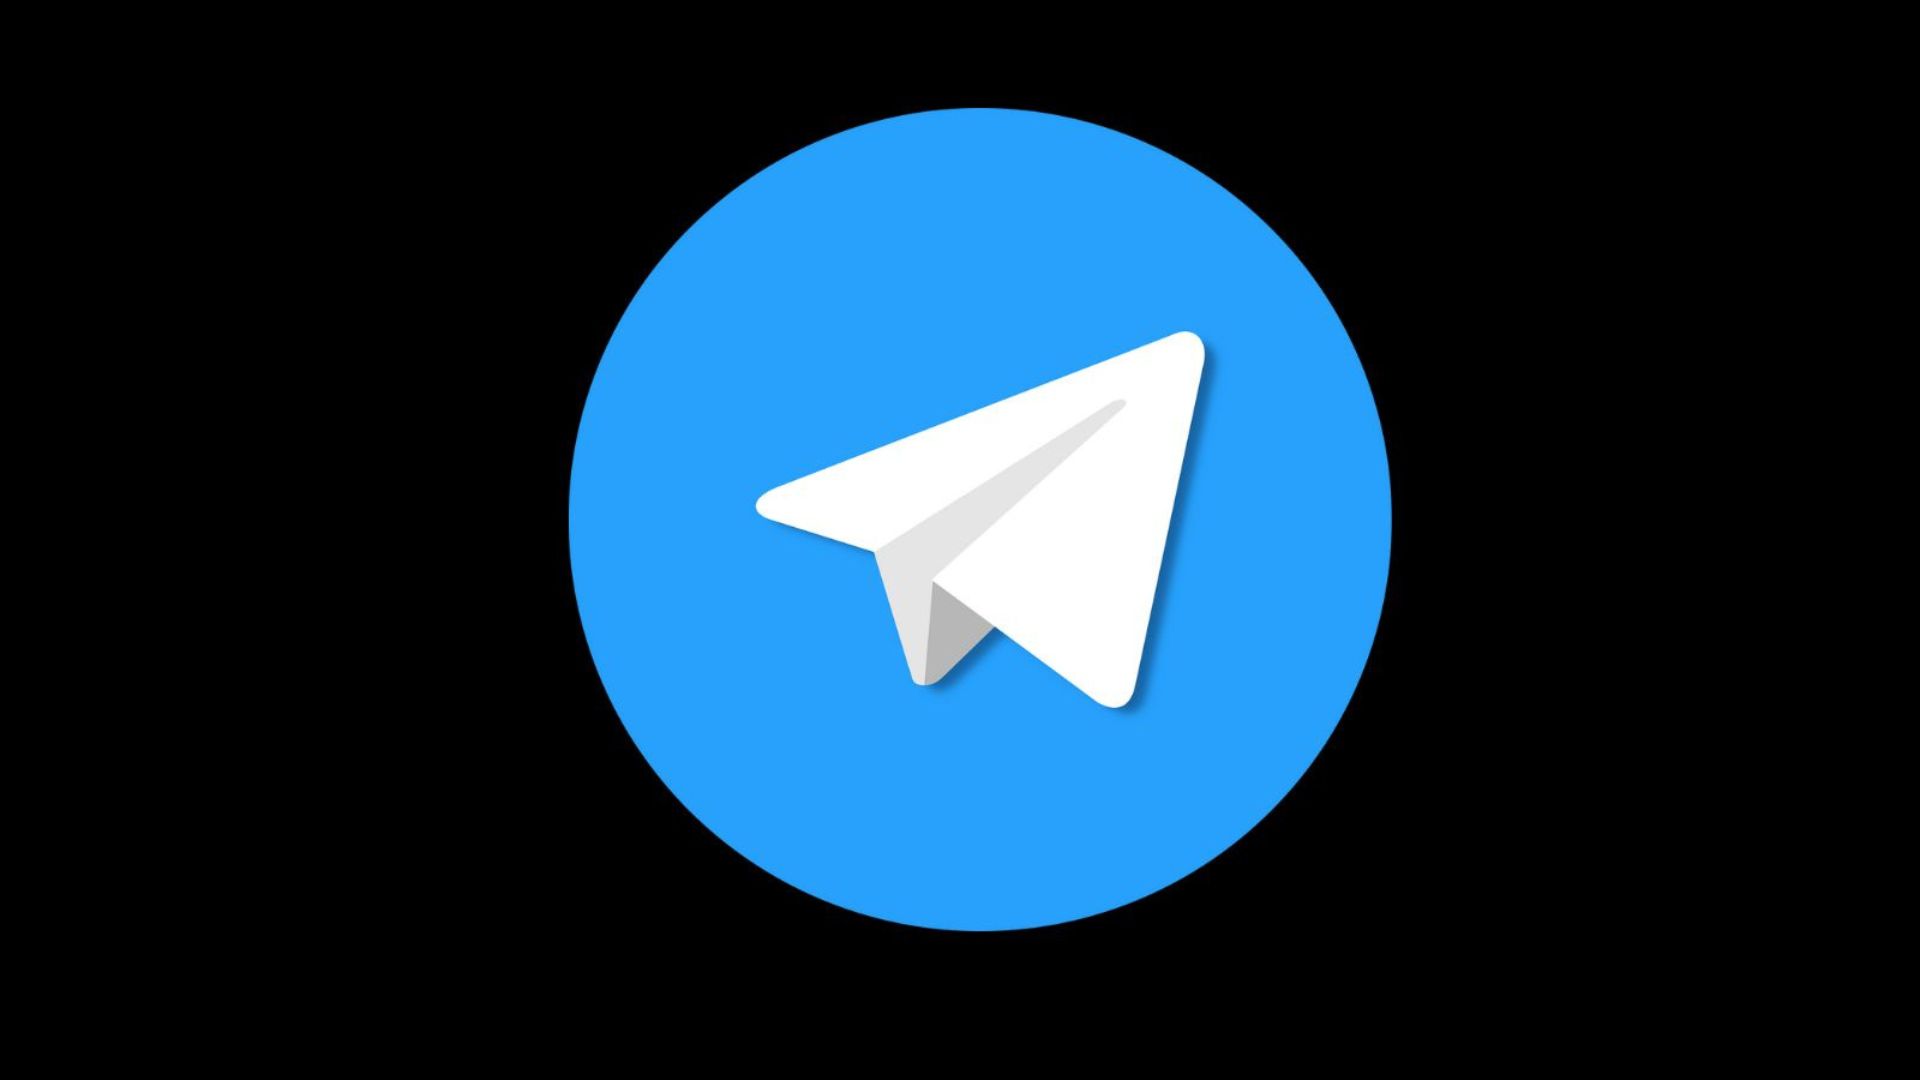 Telegram’s Sticker Editor: Transforming Your Chats!